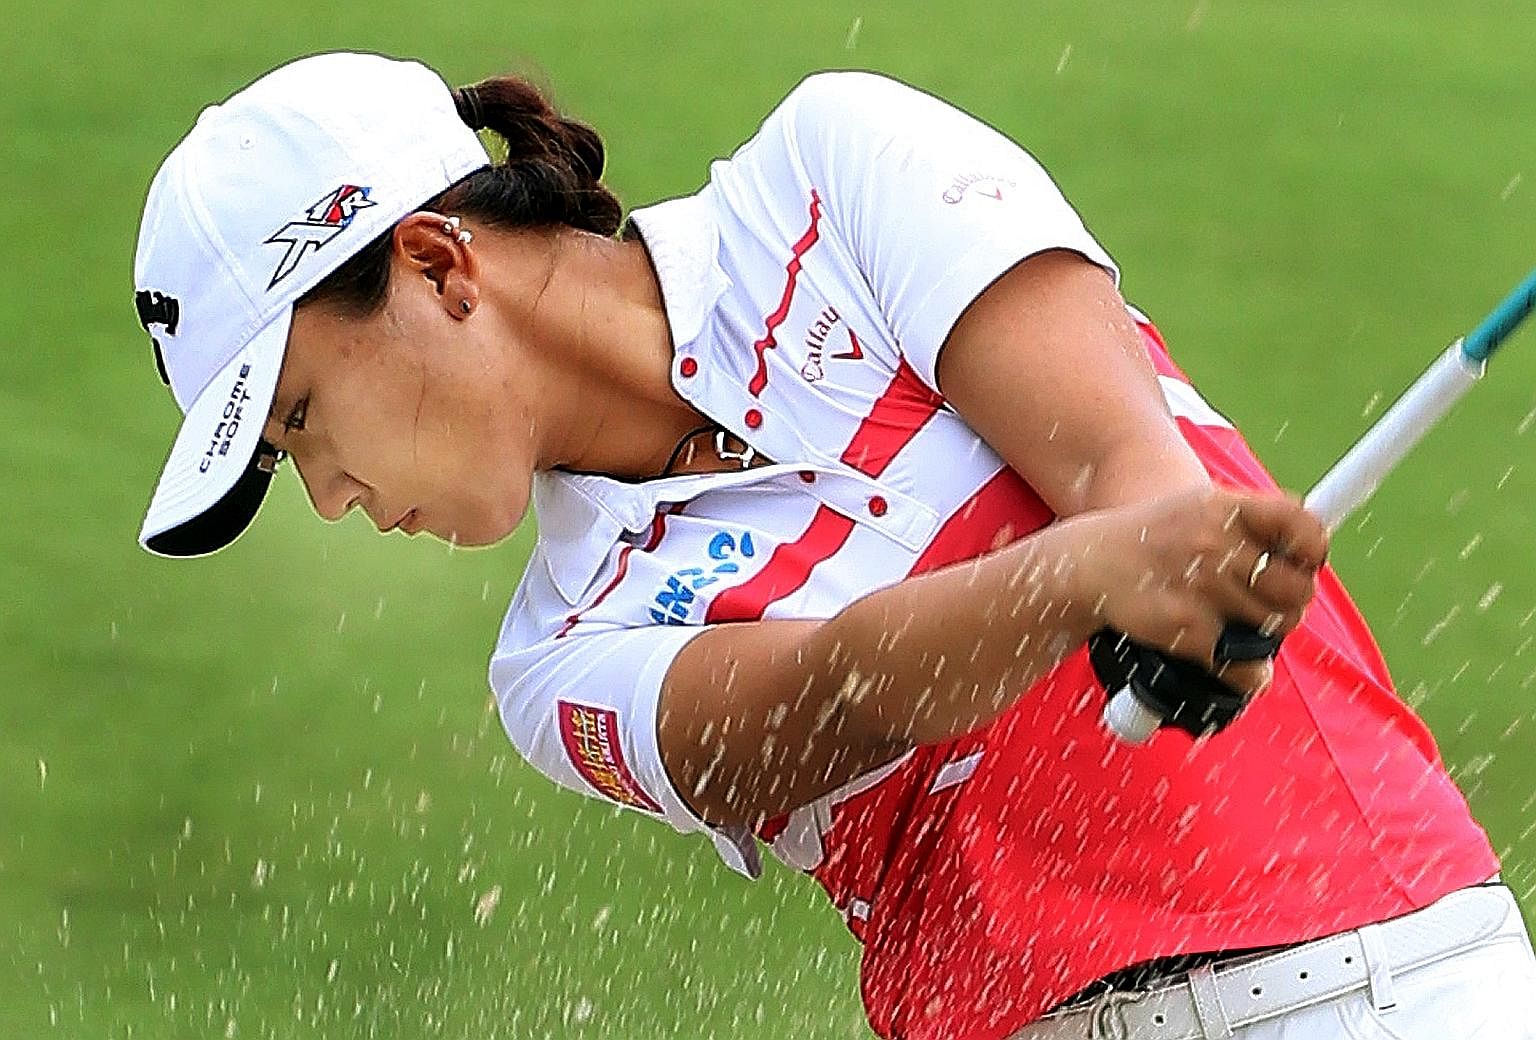 World No. 1 golfer Lydia Ko in action at the opening round of the HSBC Women's Champions yesterday.